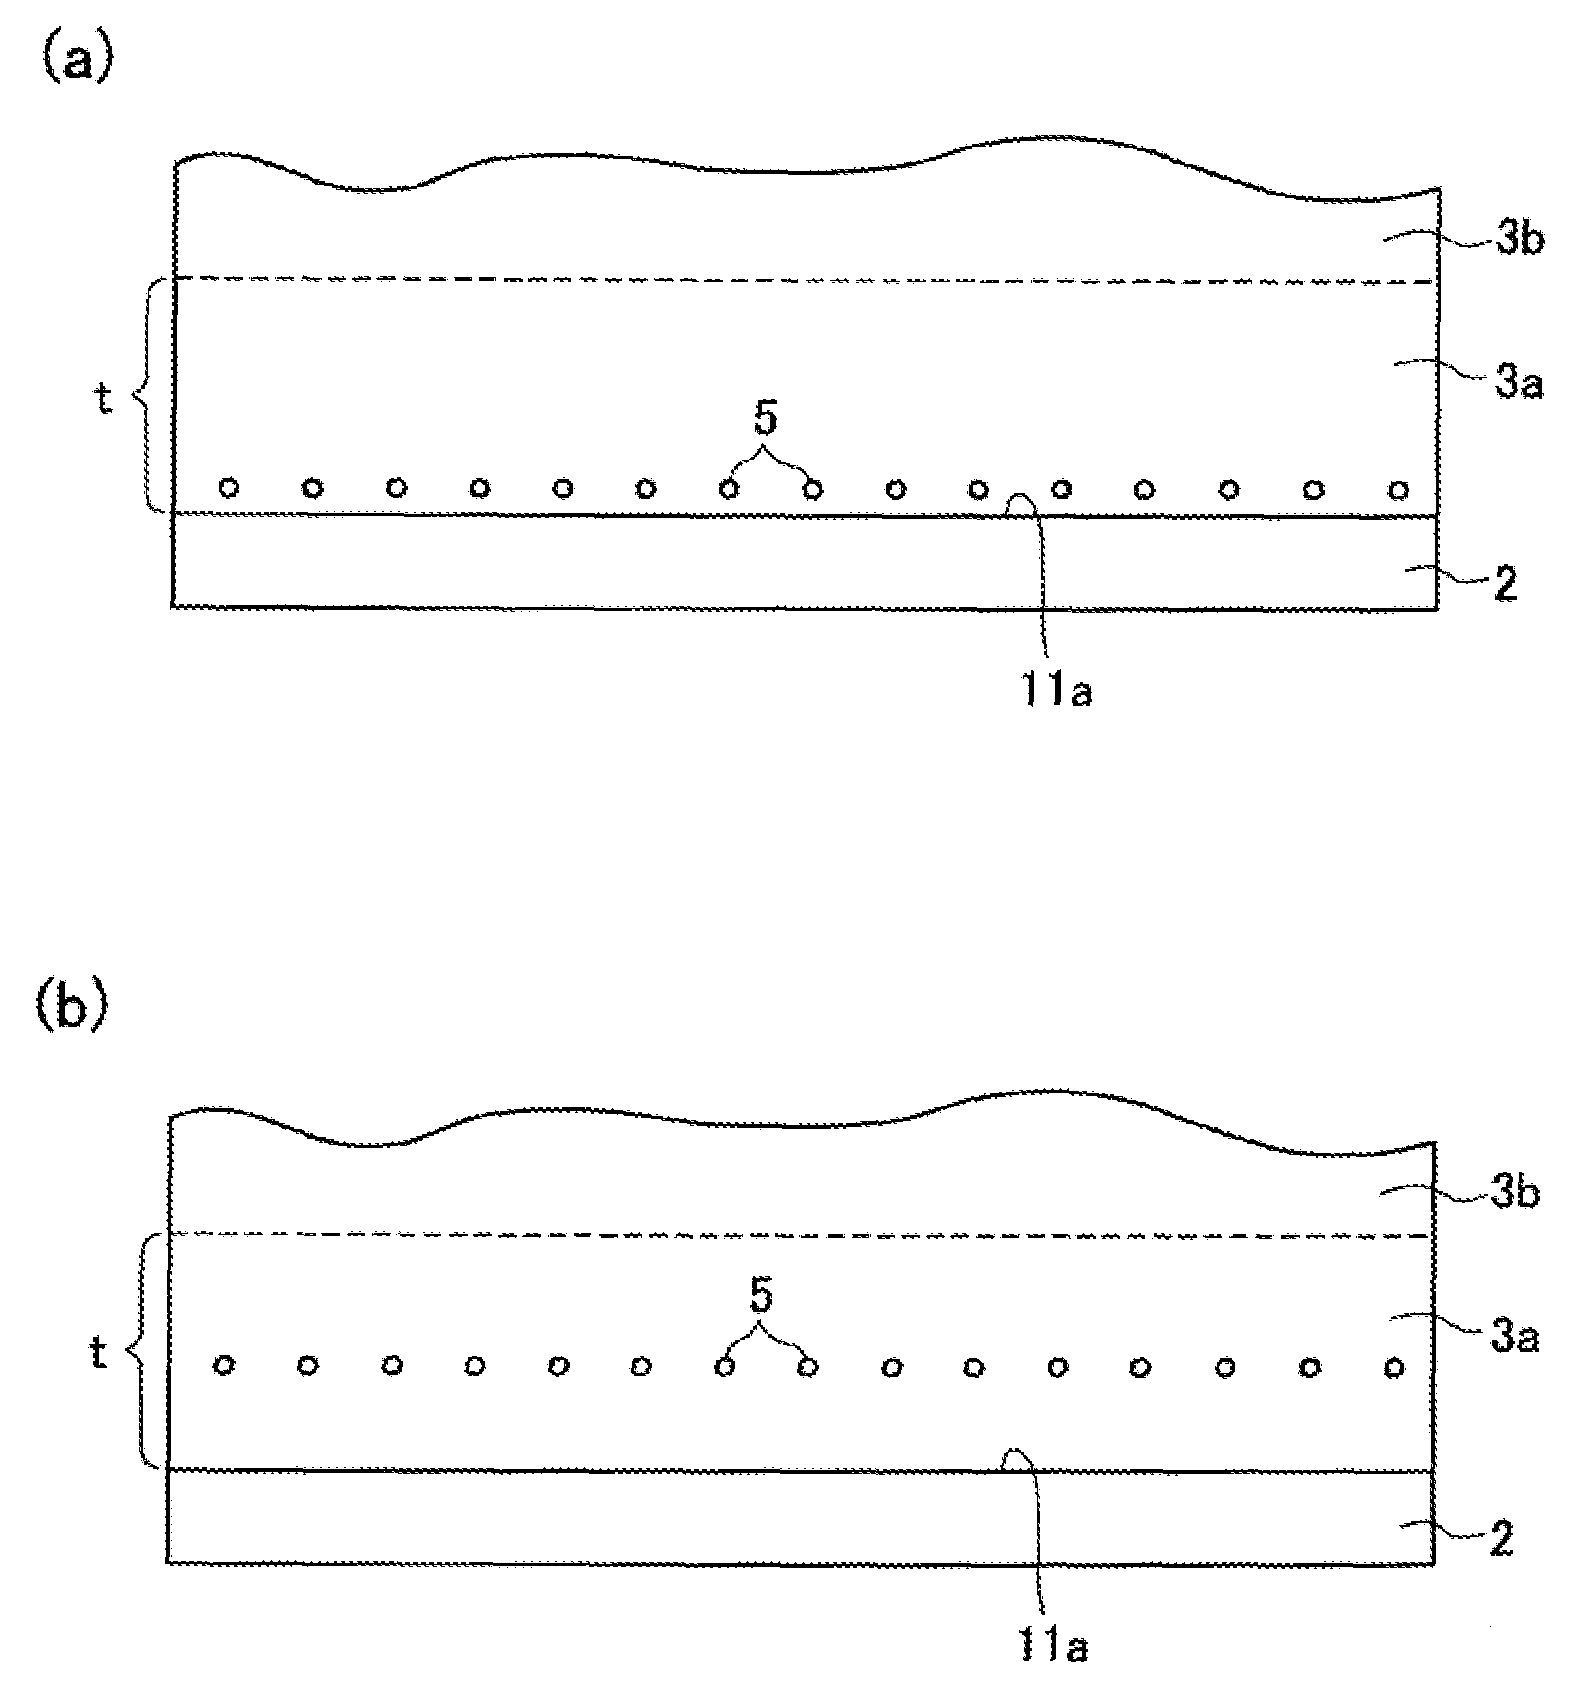 Films of nitrides of group 13 elements and layered body including the same